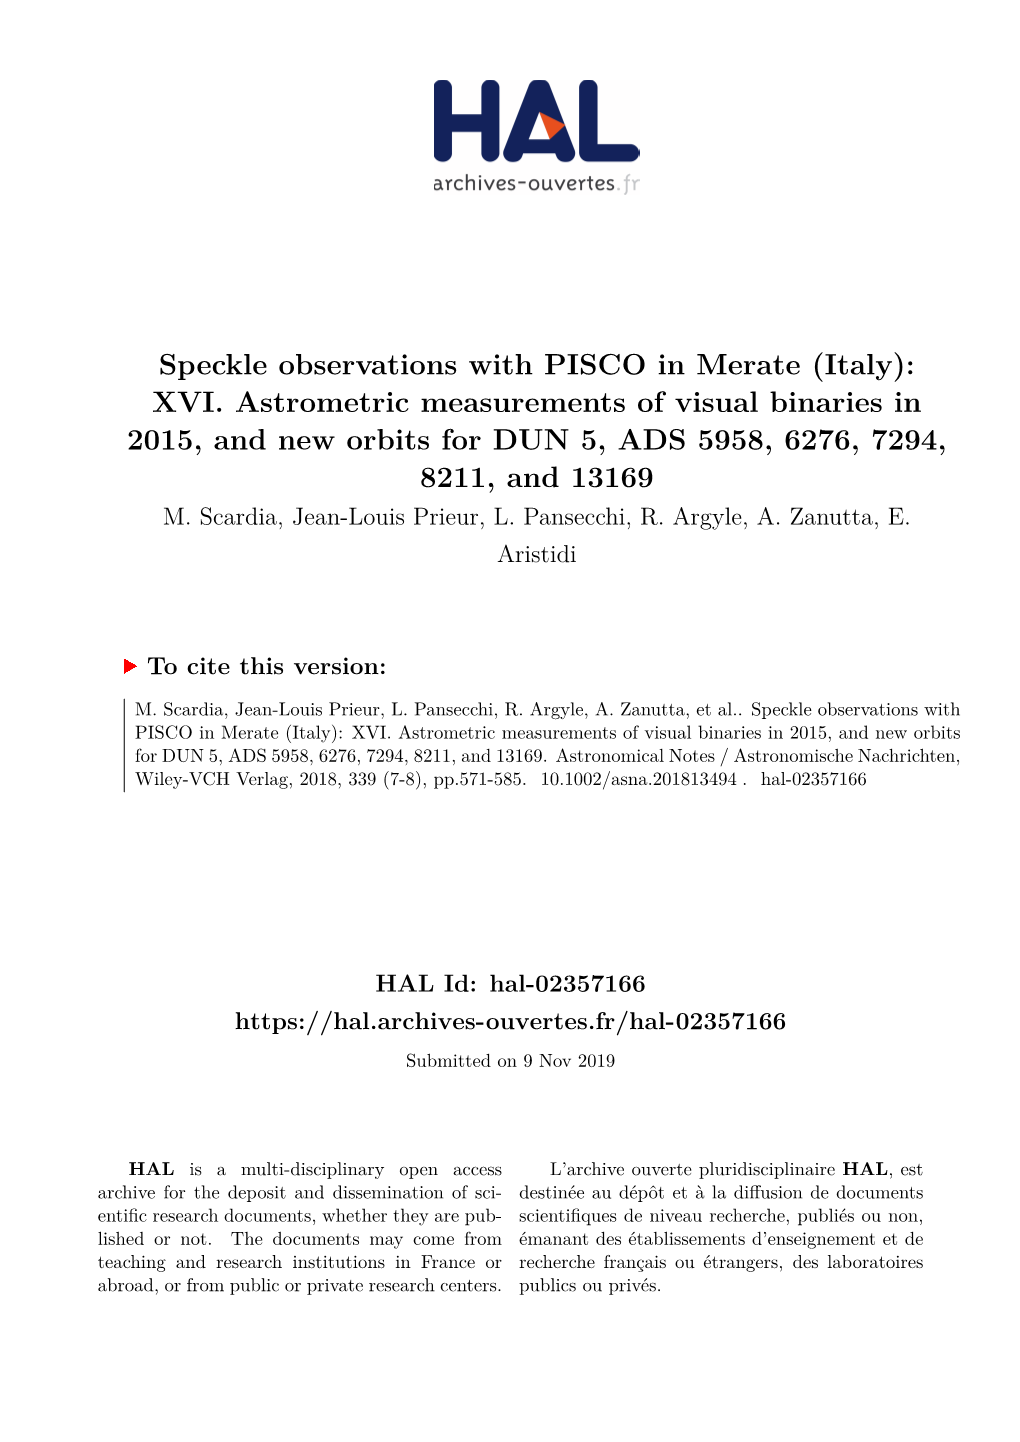 XVI. Astrometric Measurements of Visual Binaries in 2015, and New Orbits for DUN 5, ADS 5958, 6276, 7294, 8211, and 13169 M